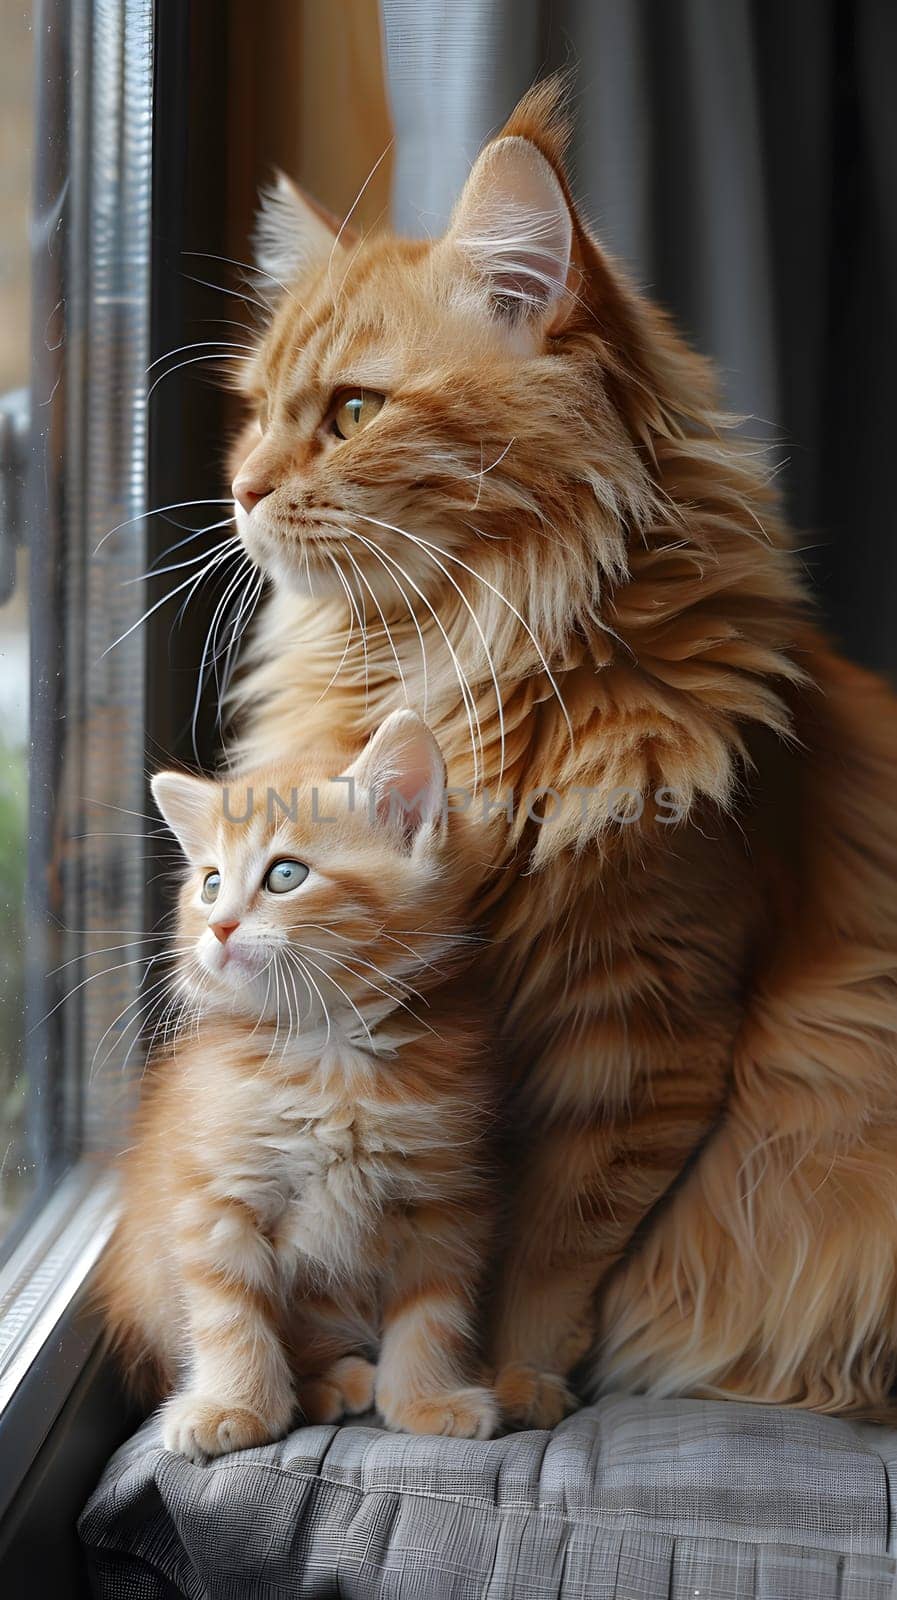 A domestic shorthaired cat and a kitten, both belonging to the Felidae family of small to mediumsized cats, are gazing out of a window with their whiskers twitching